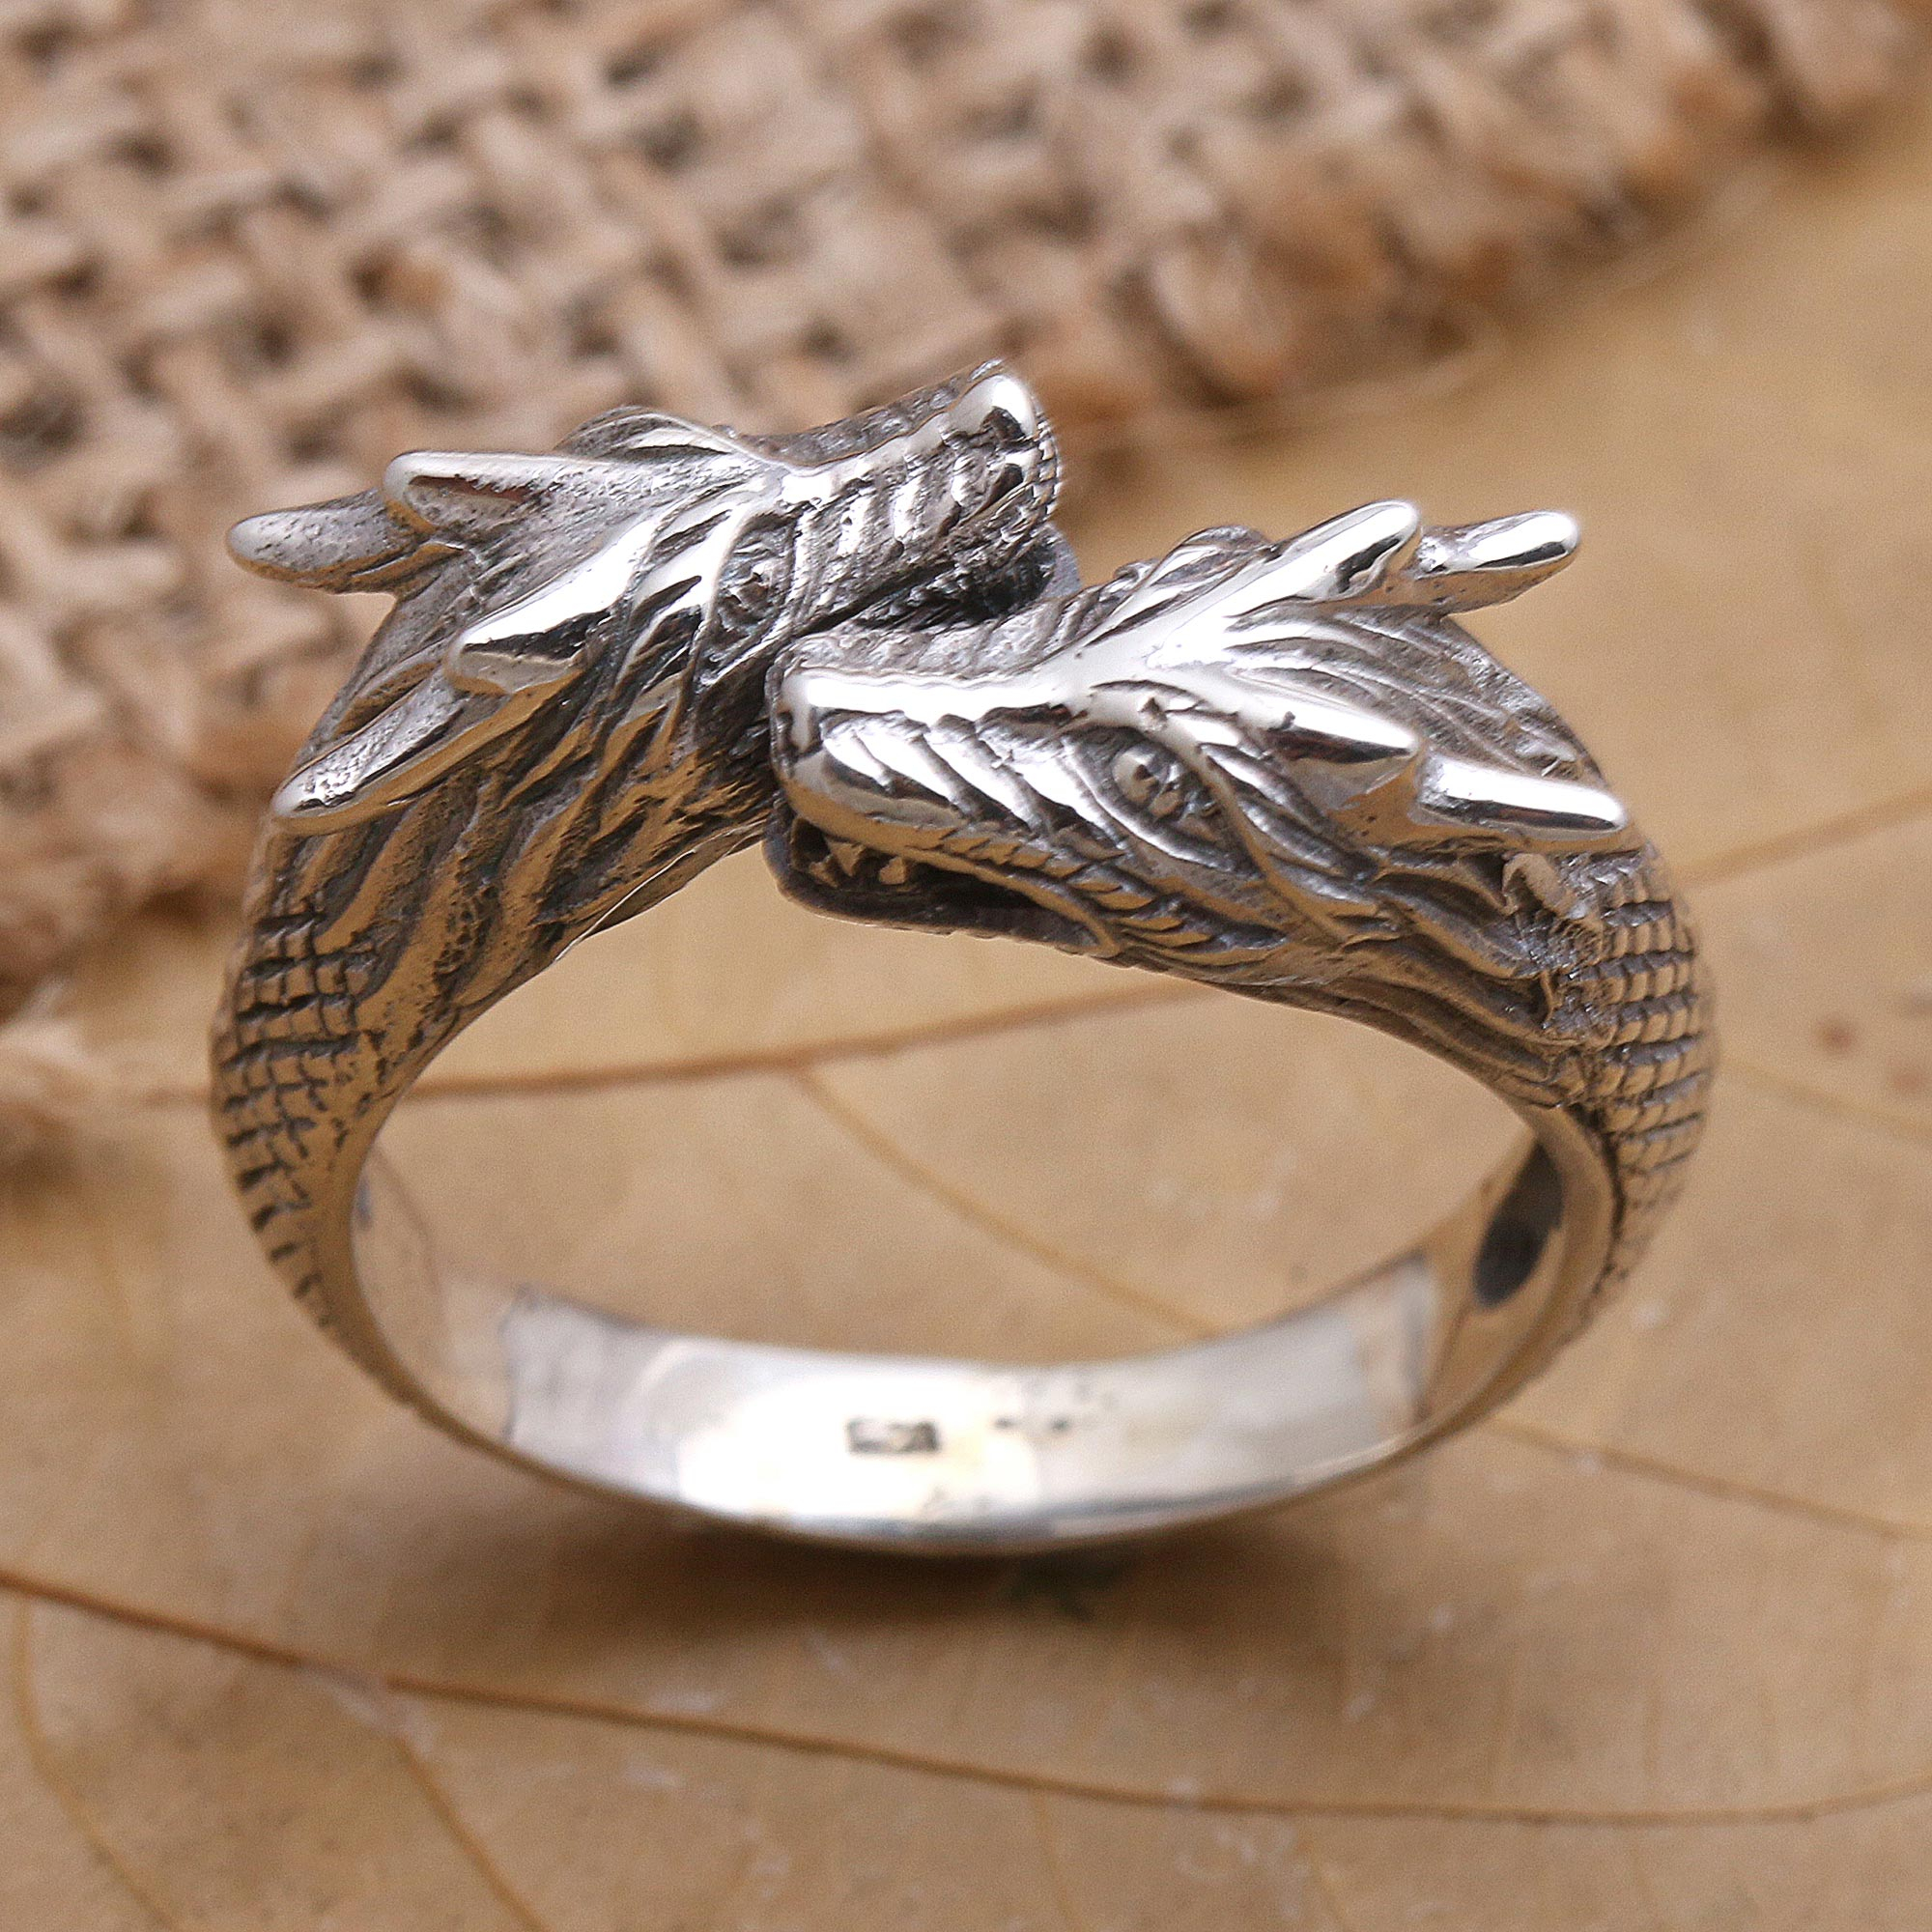 Vintage Luxury Men's Fashion 925 Sterling Silver Black Dragon Rings Inlay  Garnet Gem Carved Mythical Dragon Ring Punk Jewelry Anniversary Gift | Wish